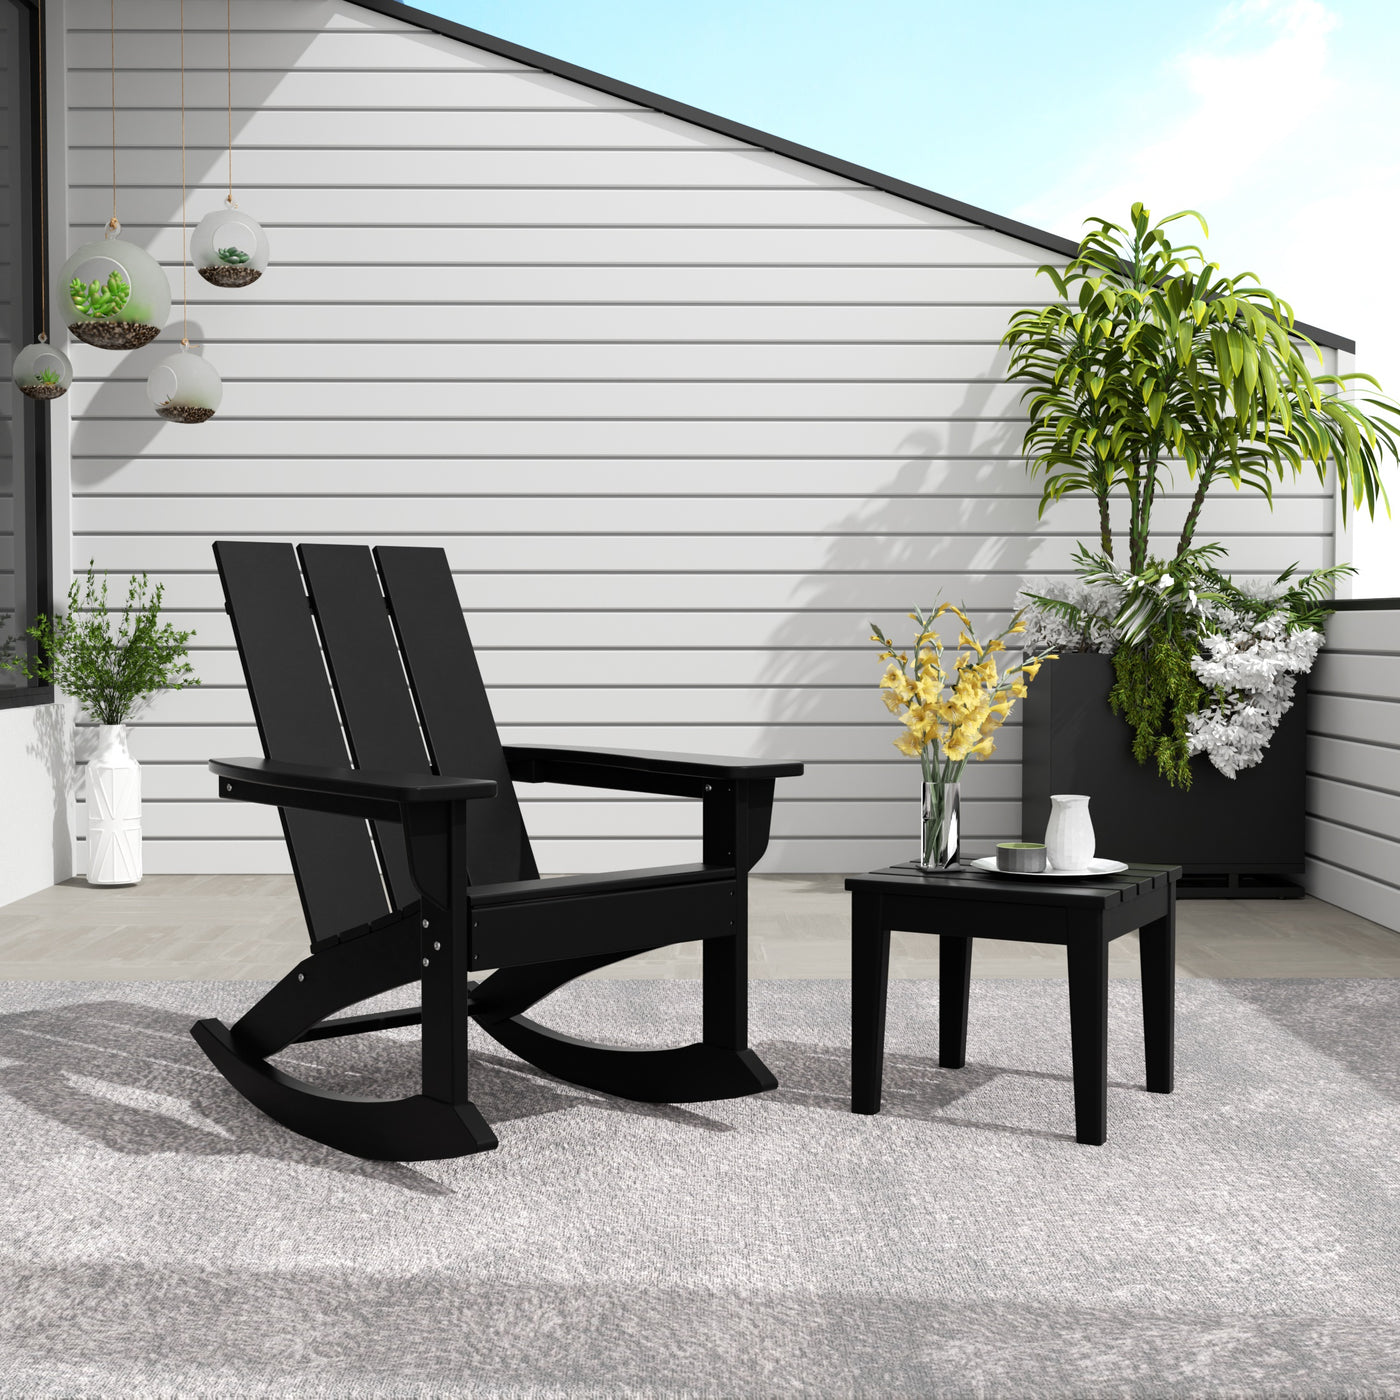 Ashore 2-Piece Modern Rocking Poly Adirondack Chair With Side Table Set